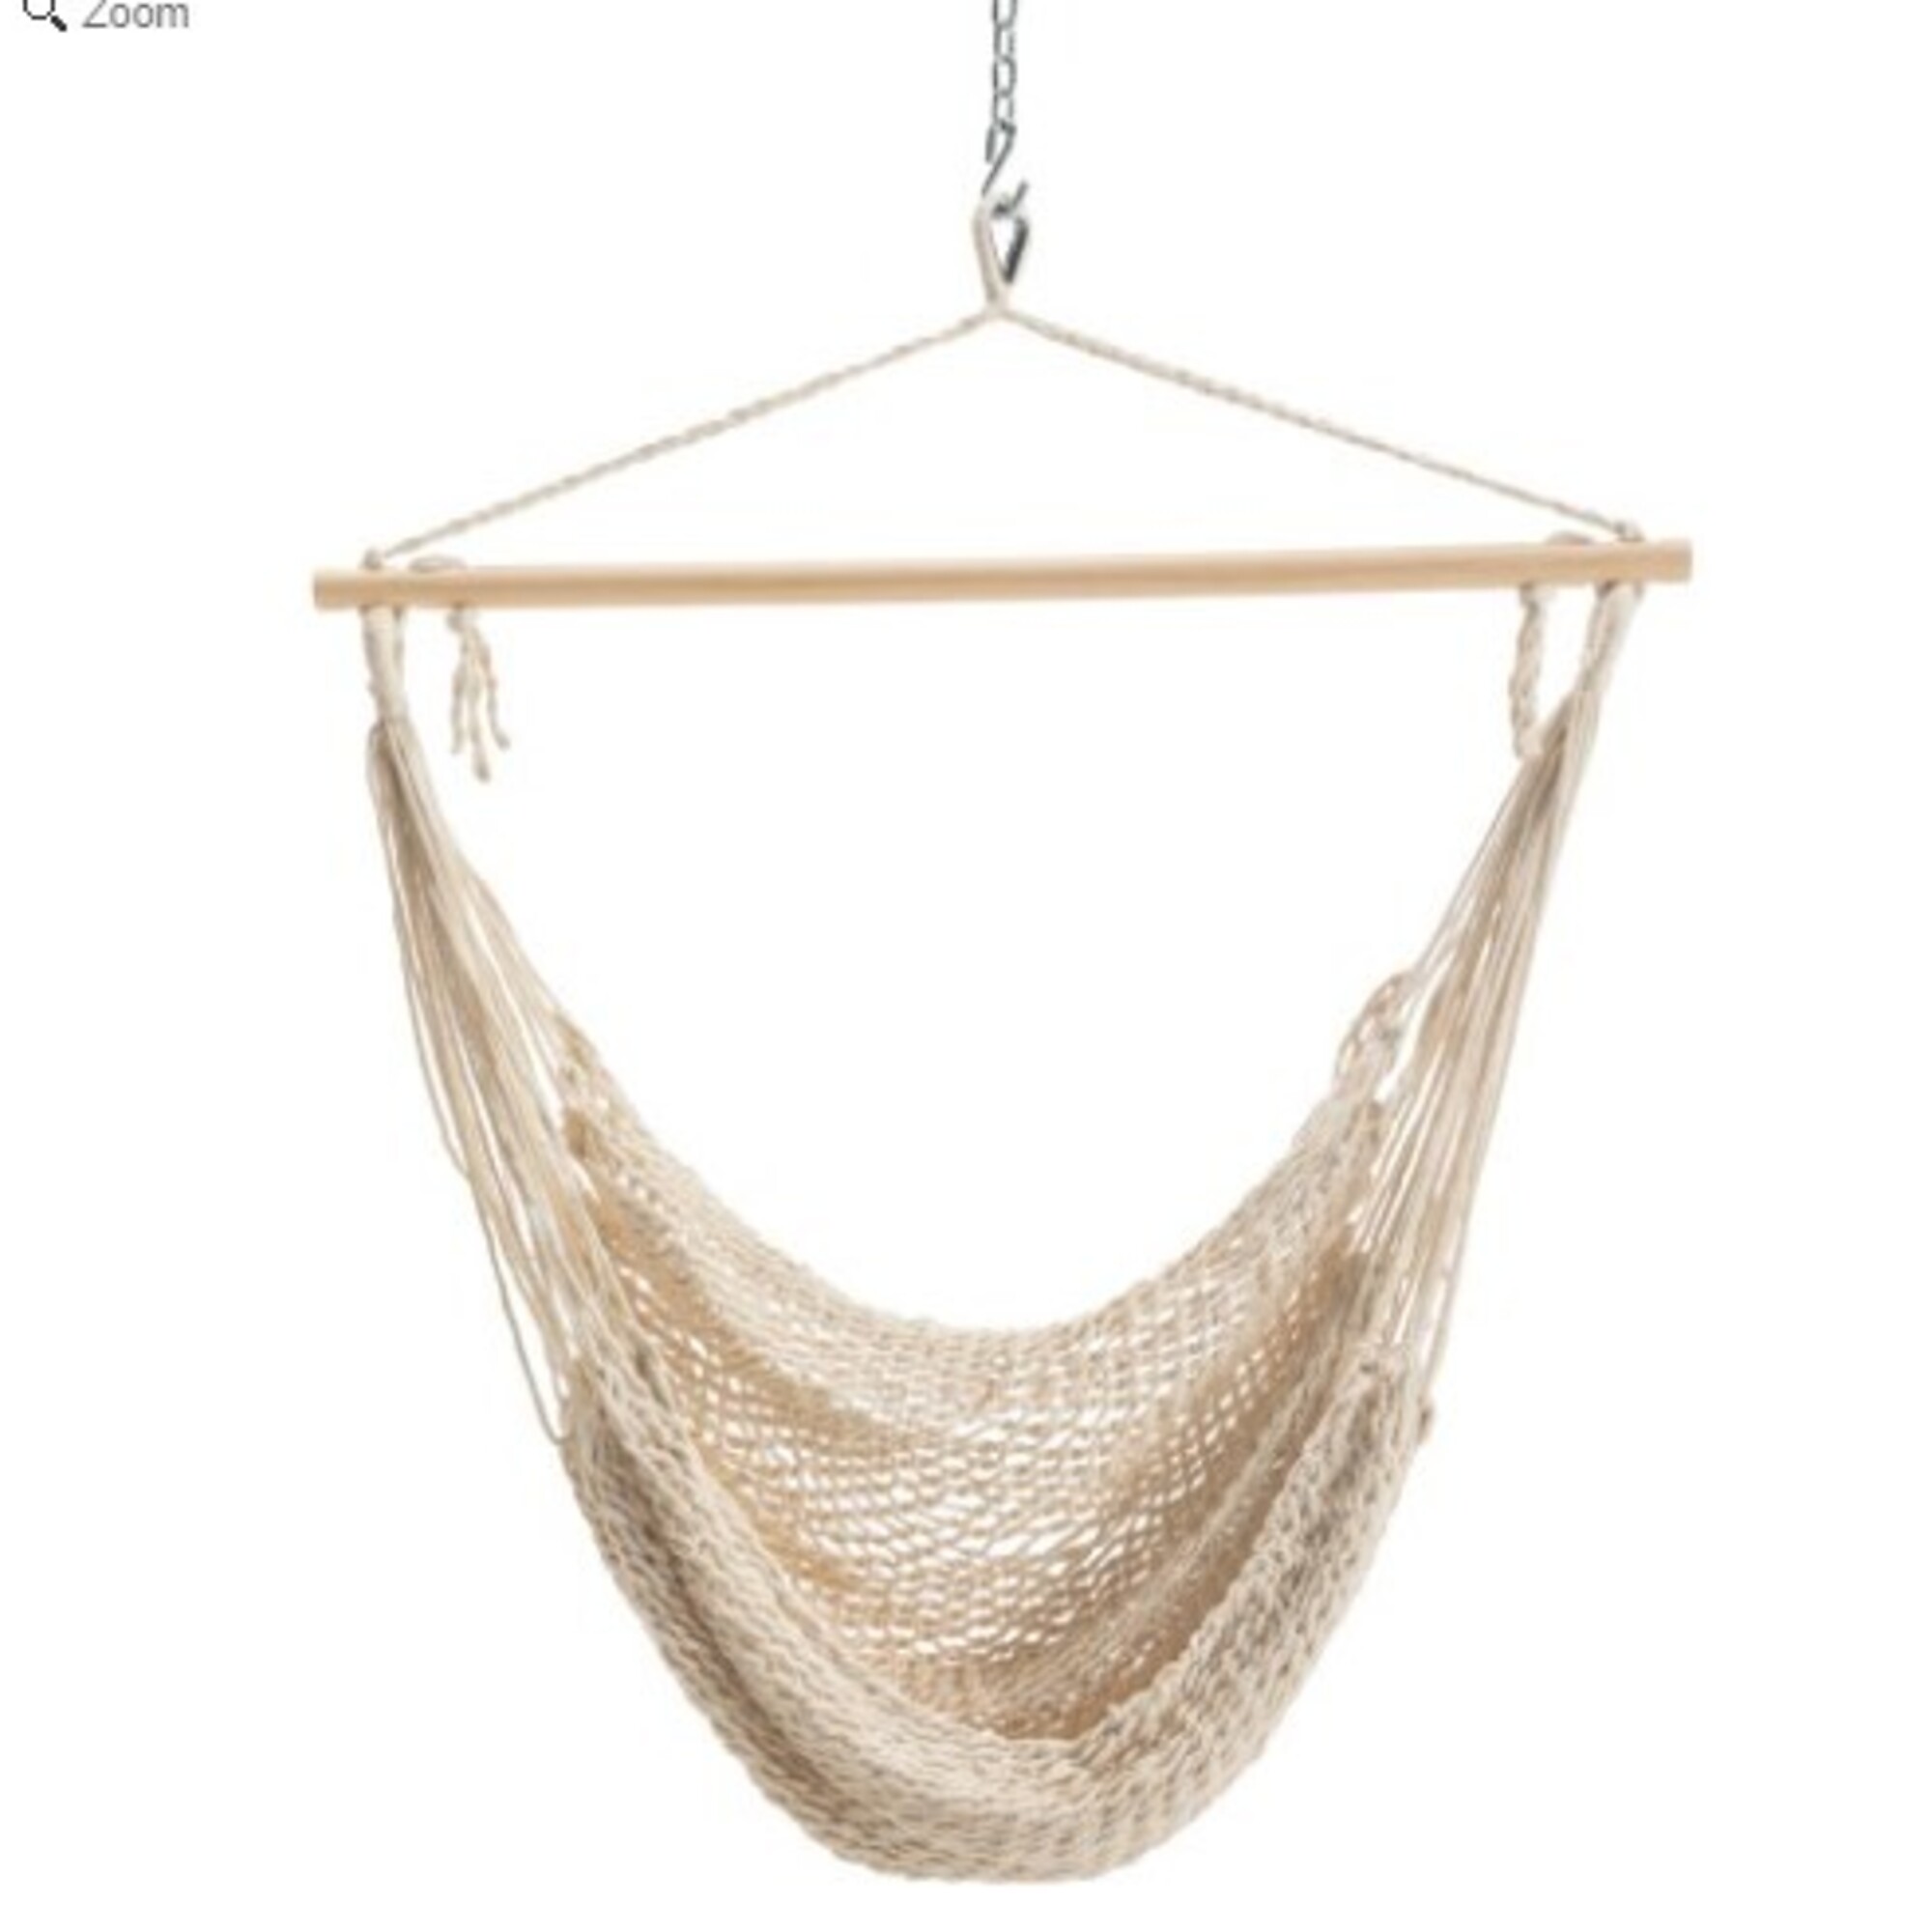 Castaway Living, Single Polyester Rope Swing - Oatmeal, Color Natural, Capacity 250 lb, Material Polyester, Model 311OT